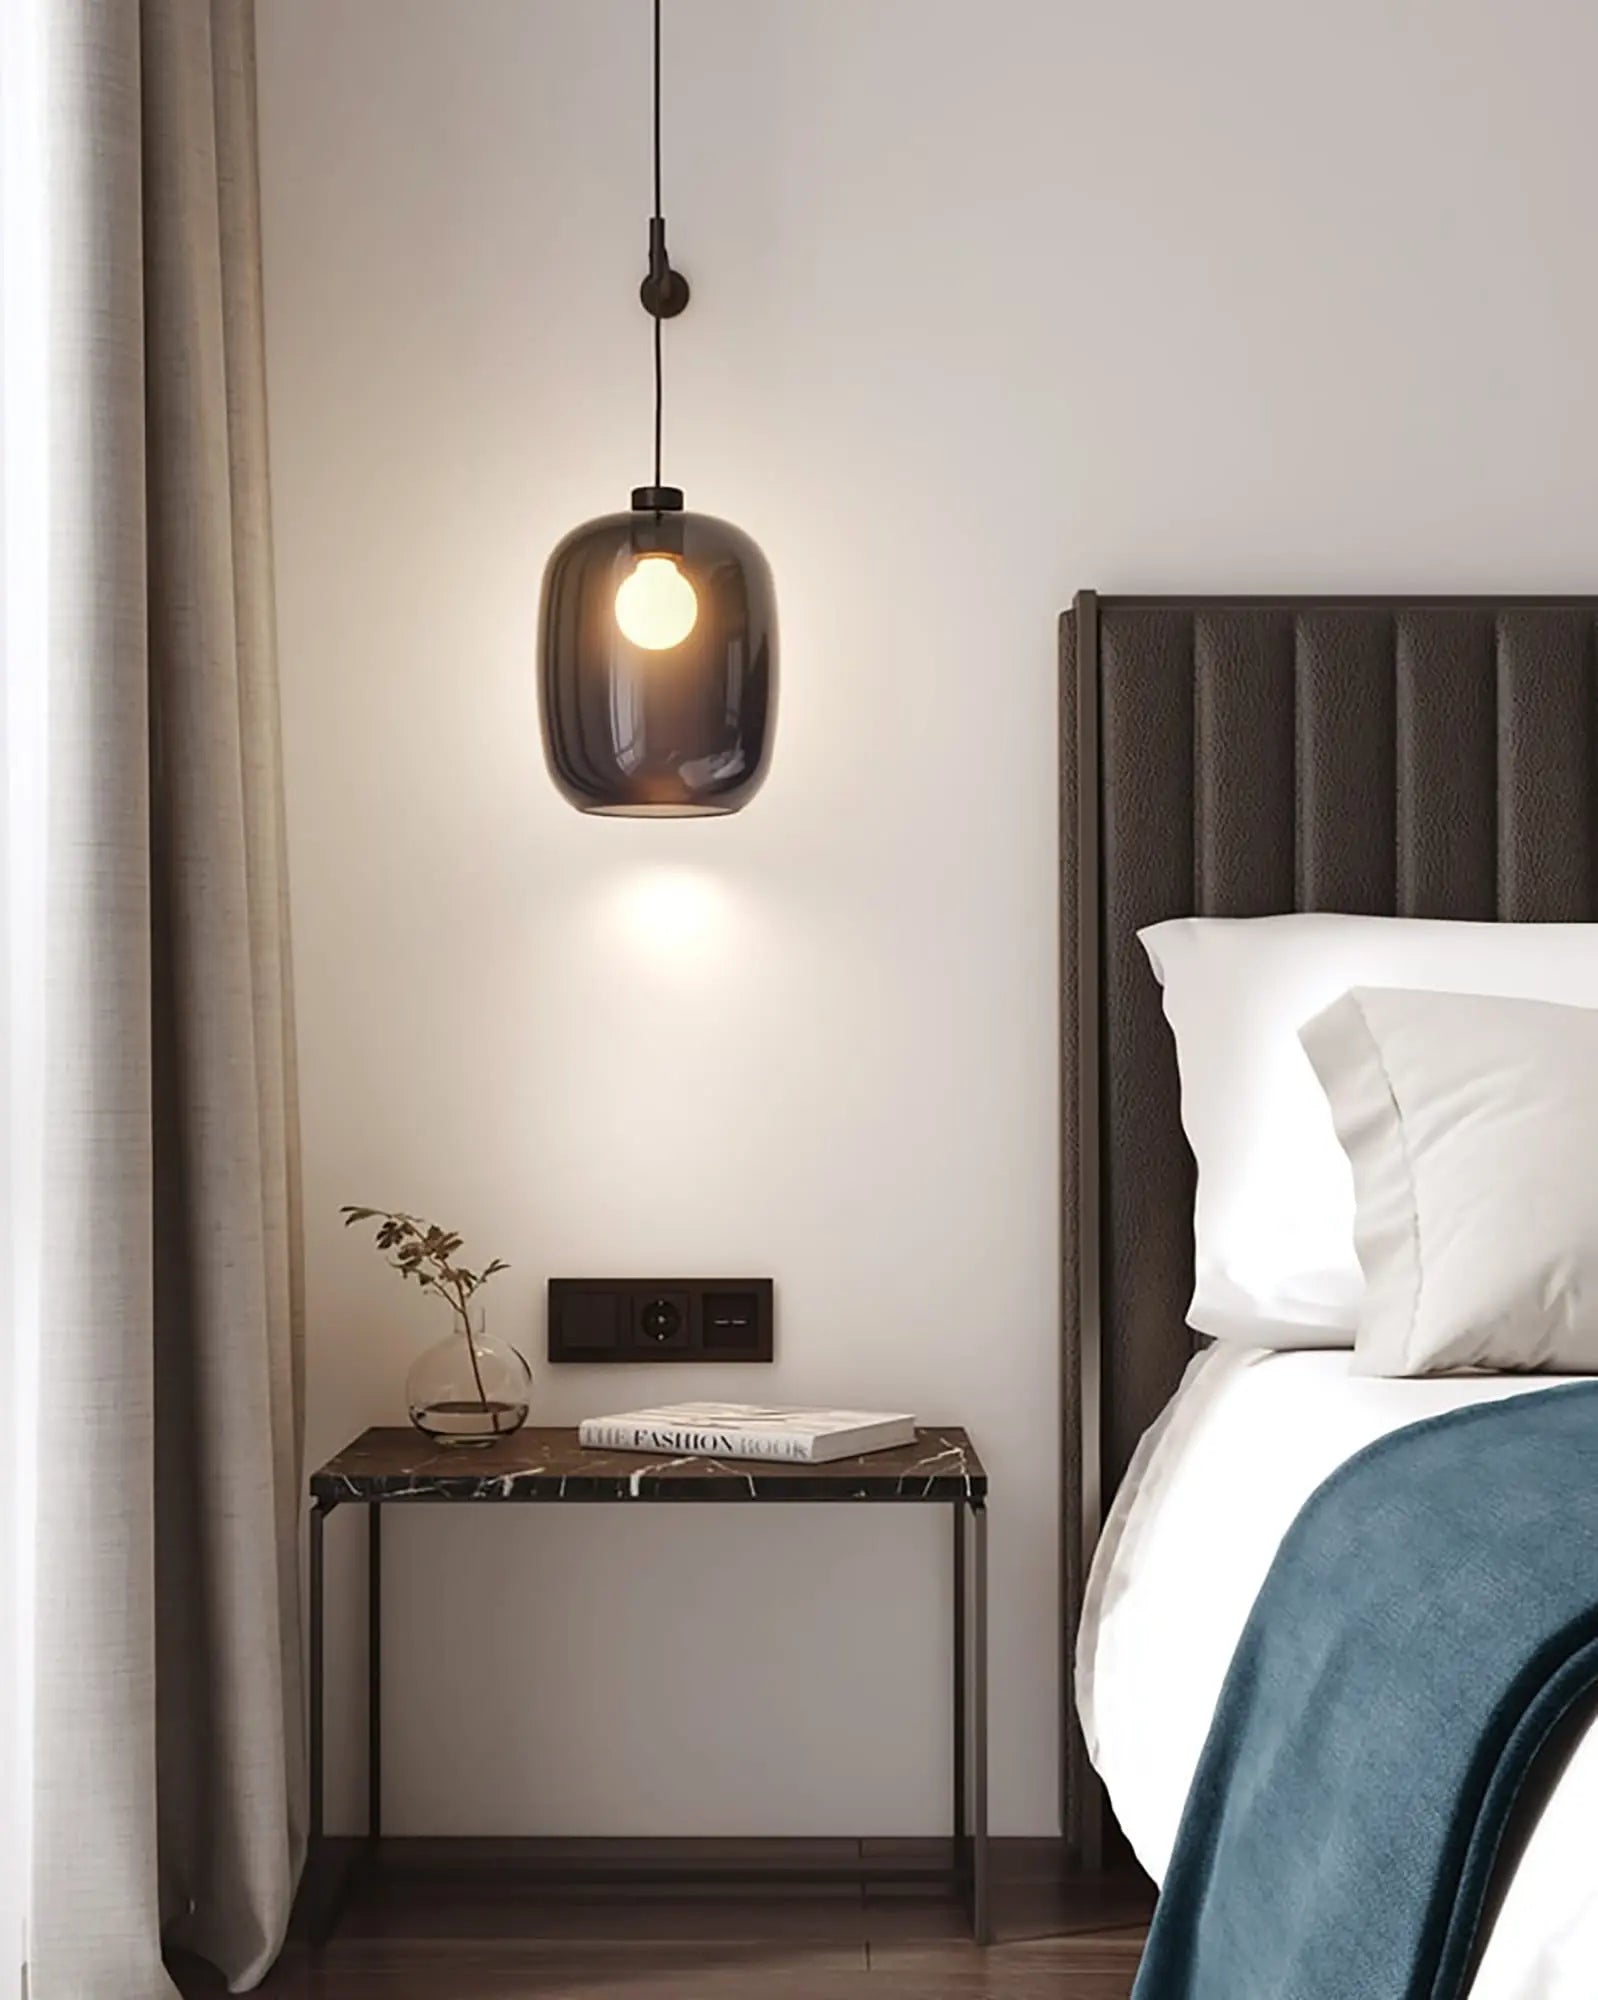 Curve contemporary pendant light with wall mount and smoke blown glass shade on a bed side